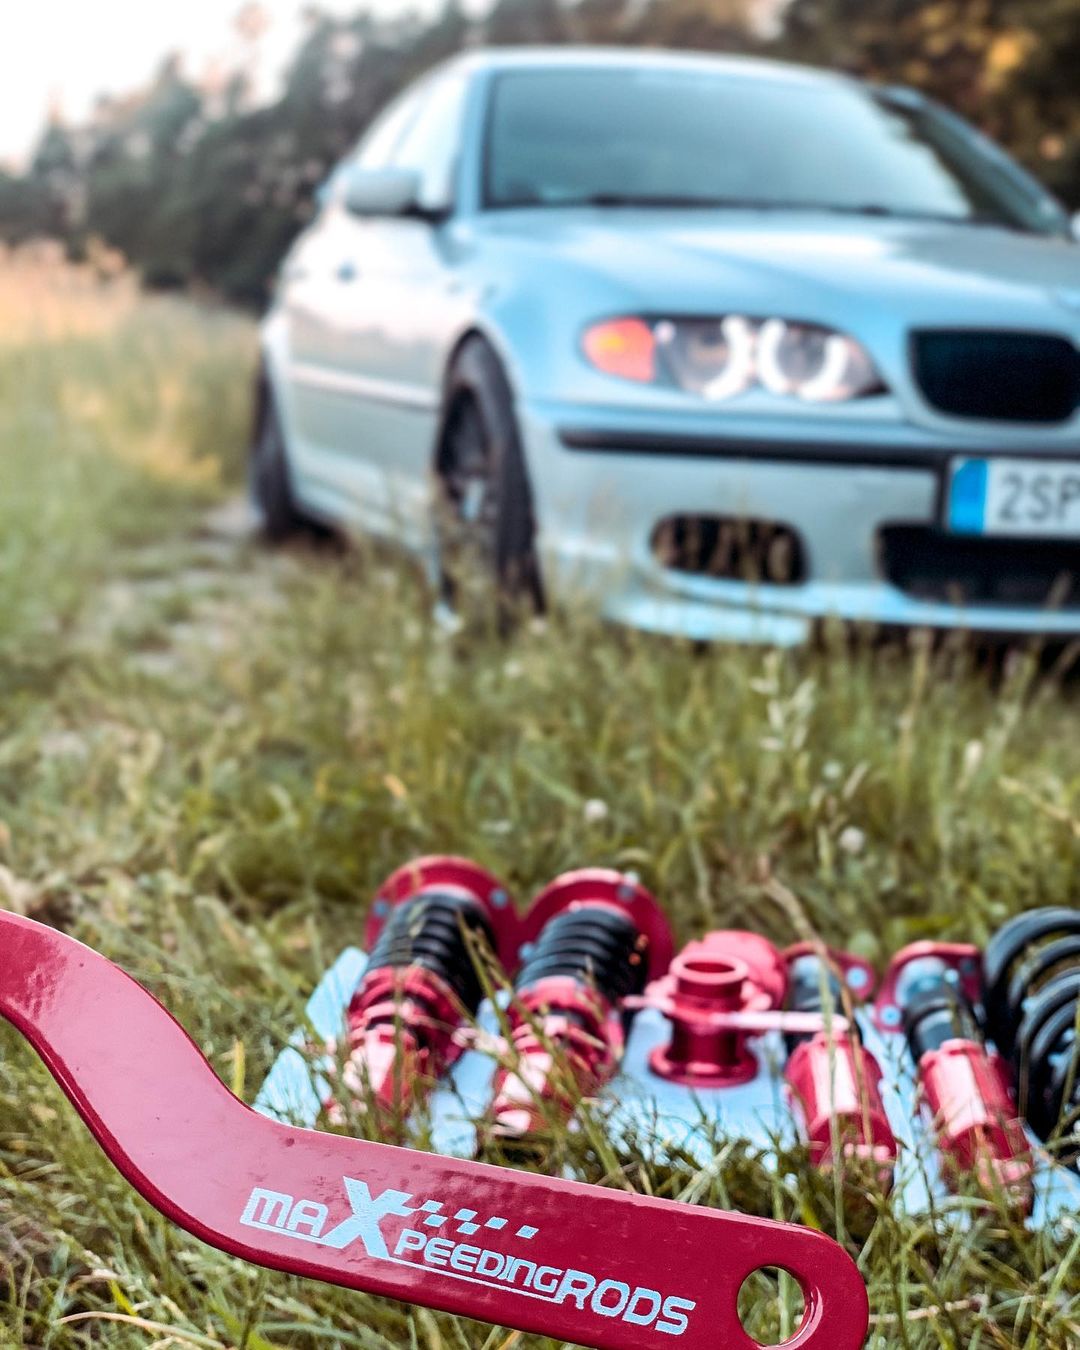 MaXpeedingRods Blog | An Automotive Blog from MaXpeedingRods - What is the Ideal Coilover Spring Rate for E36?